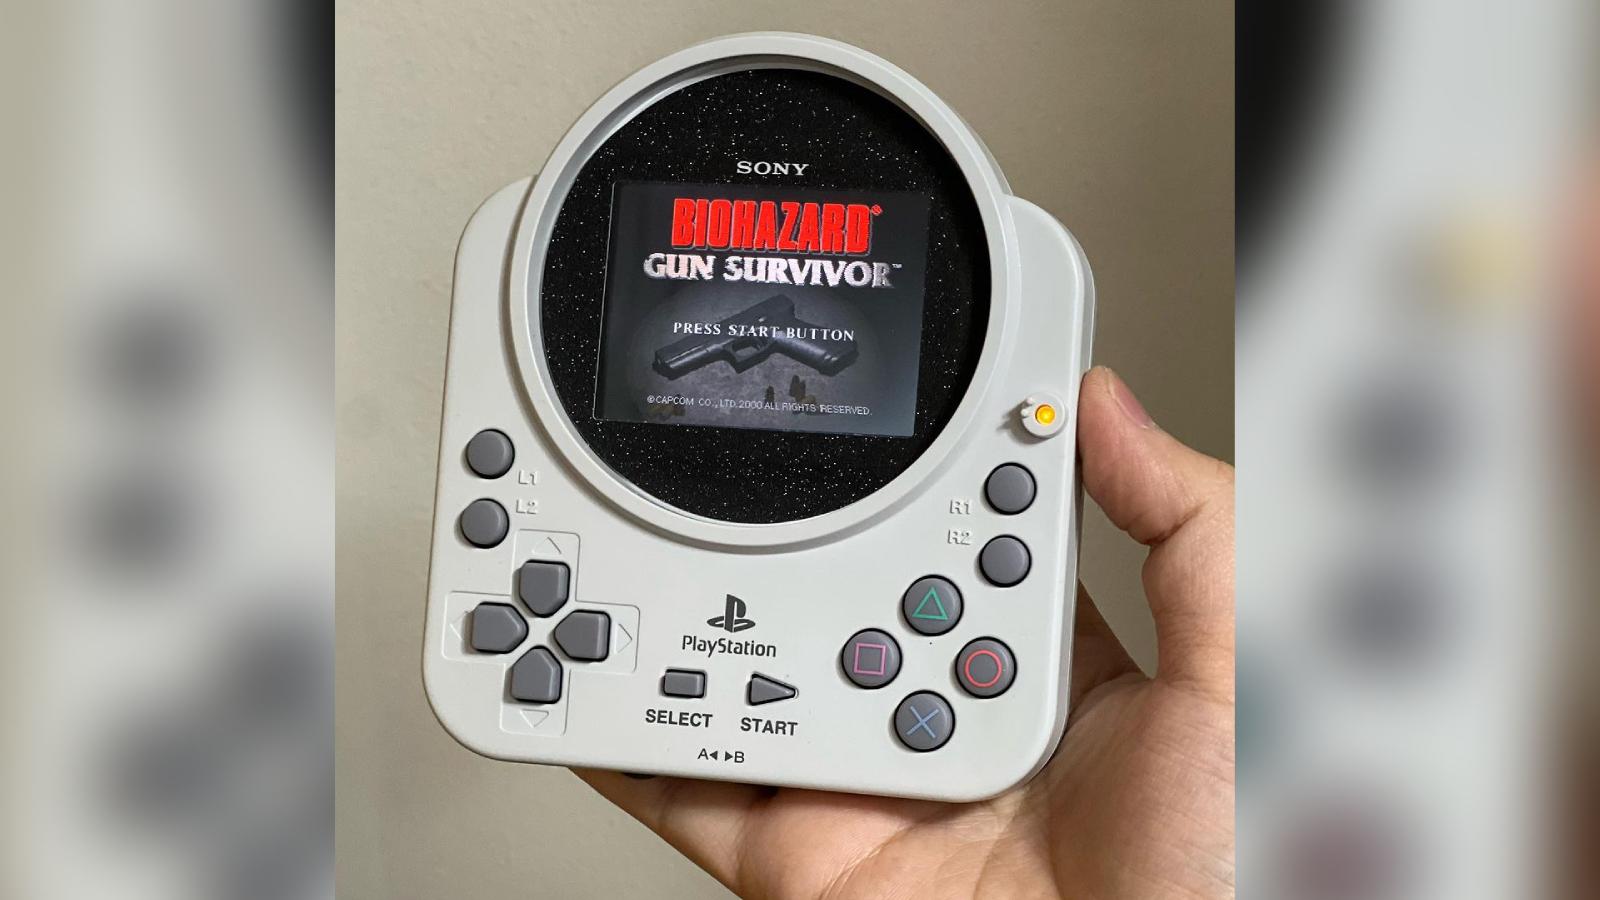 Image from haihaisb's Instagram featuring their custom made portable PlayStation.